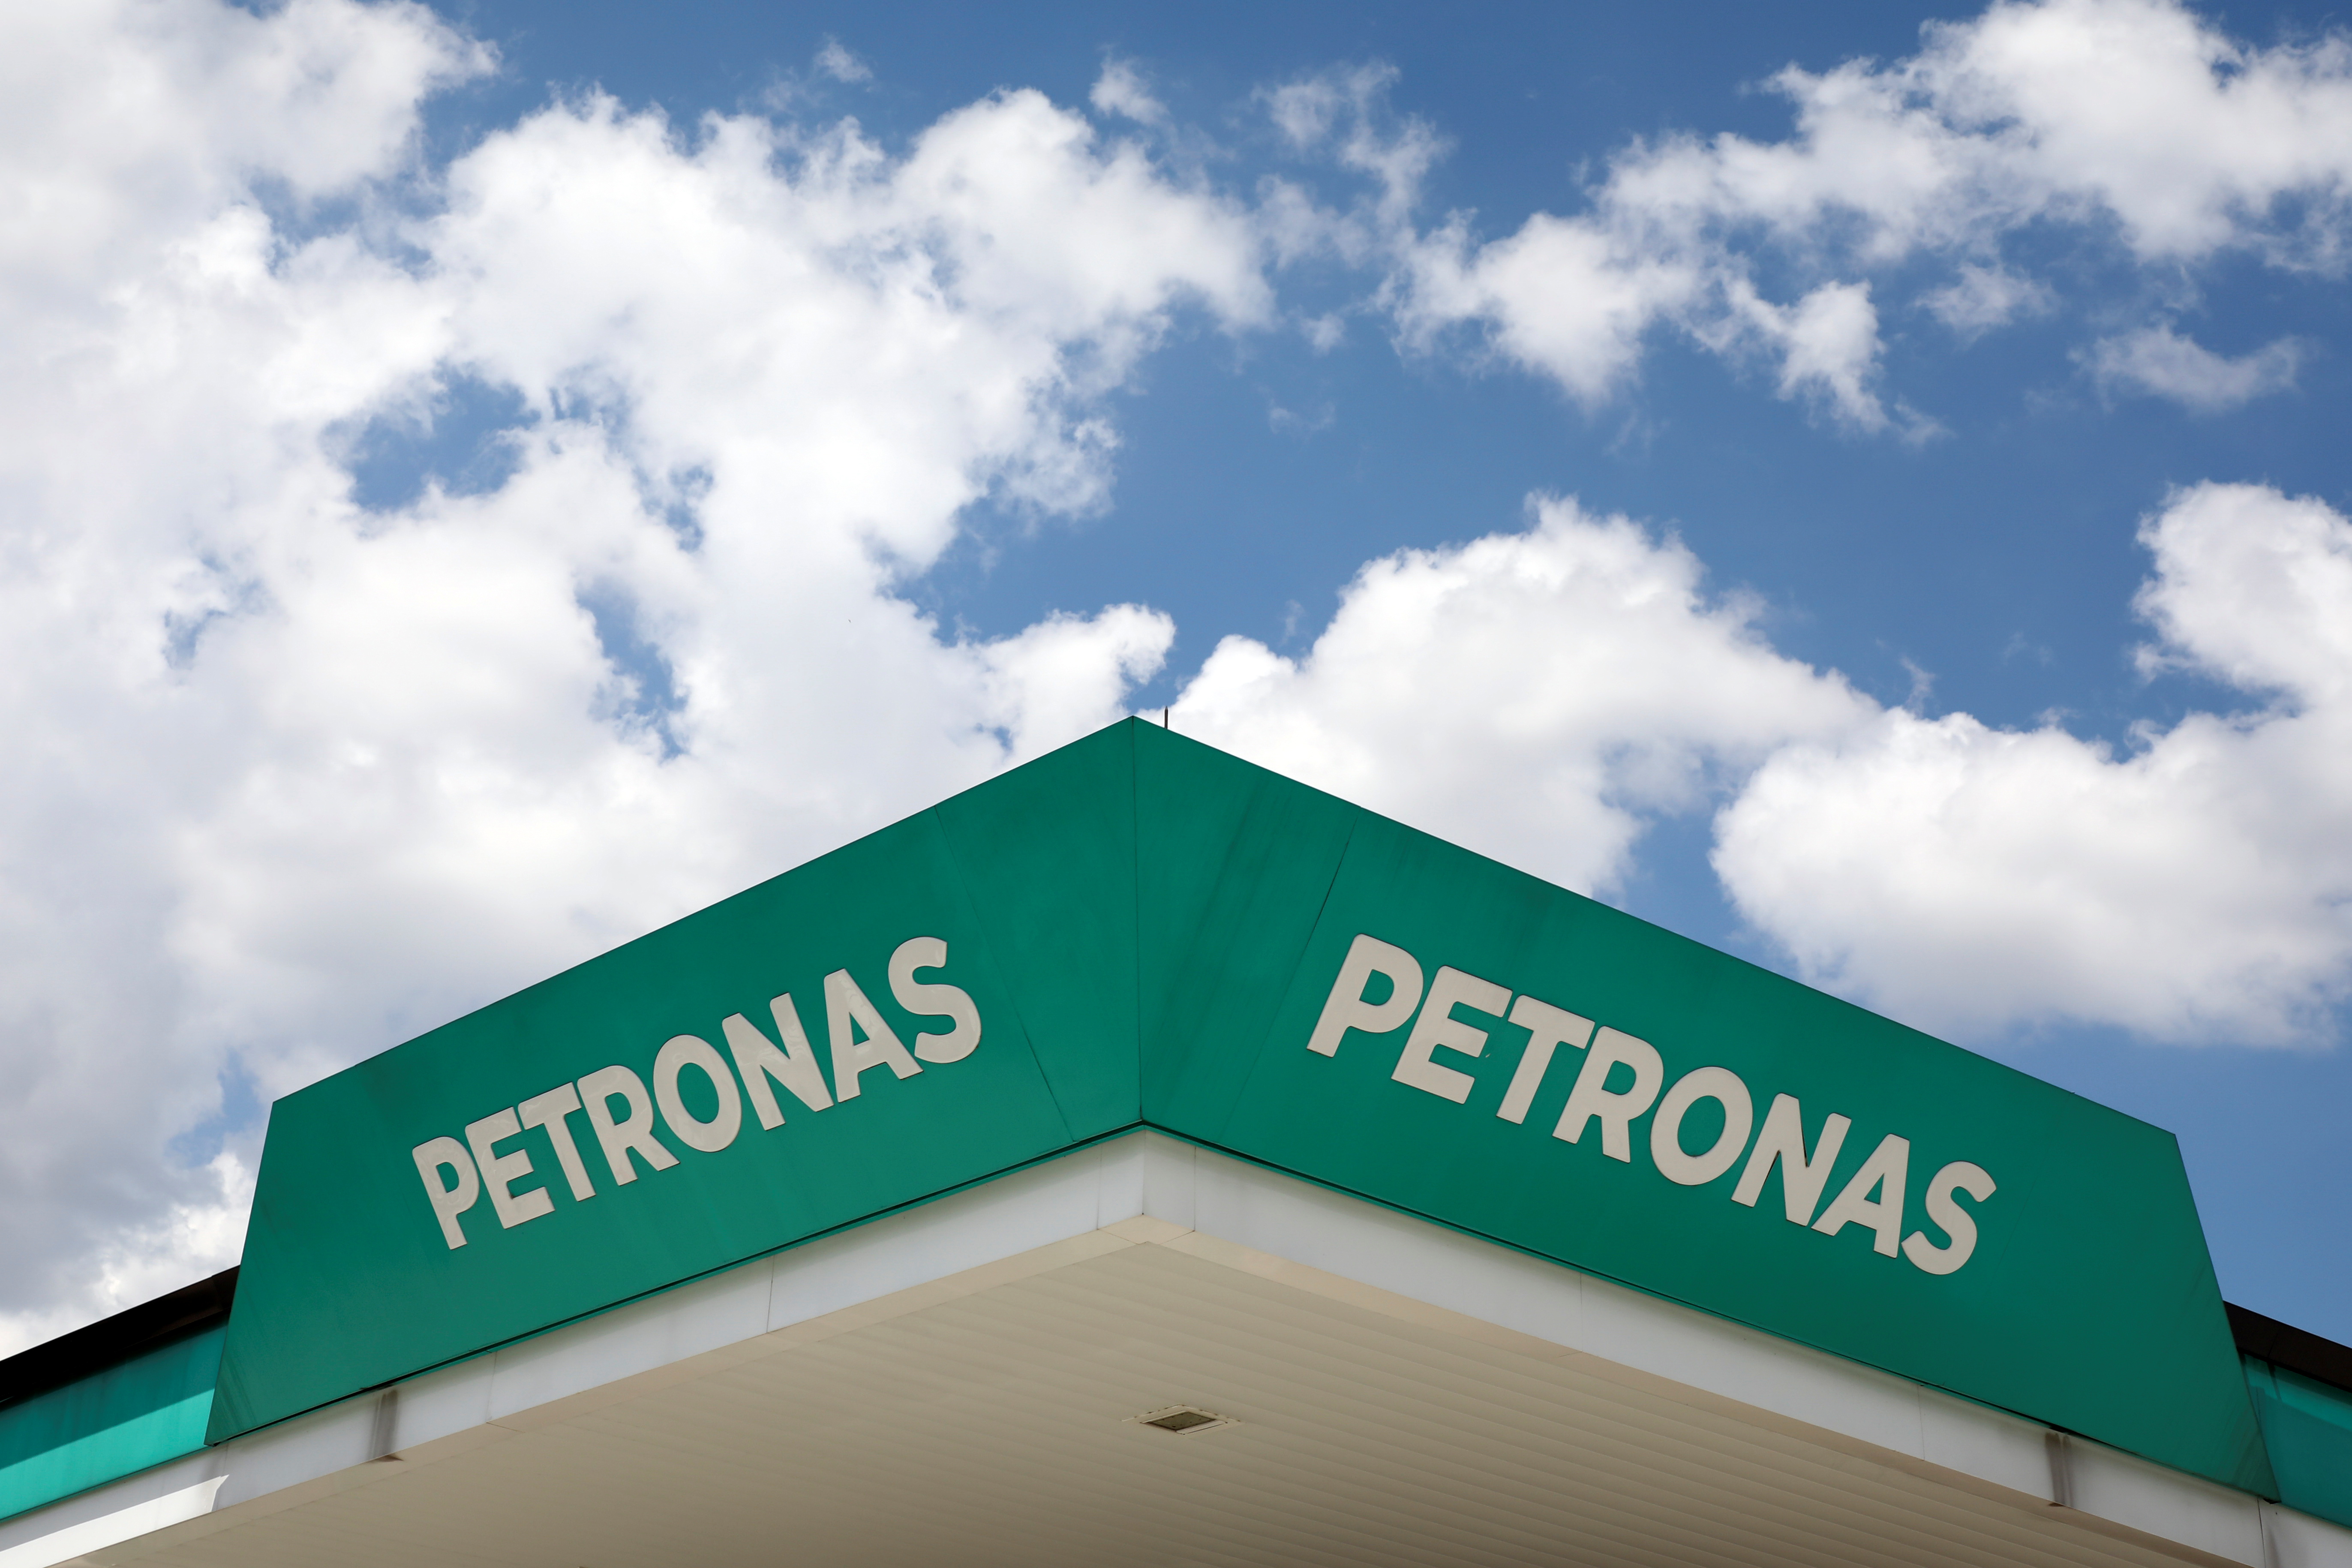 Petronas logos are pictured at a fuel station in Serdang